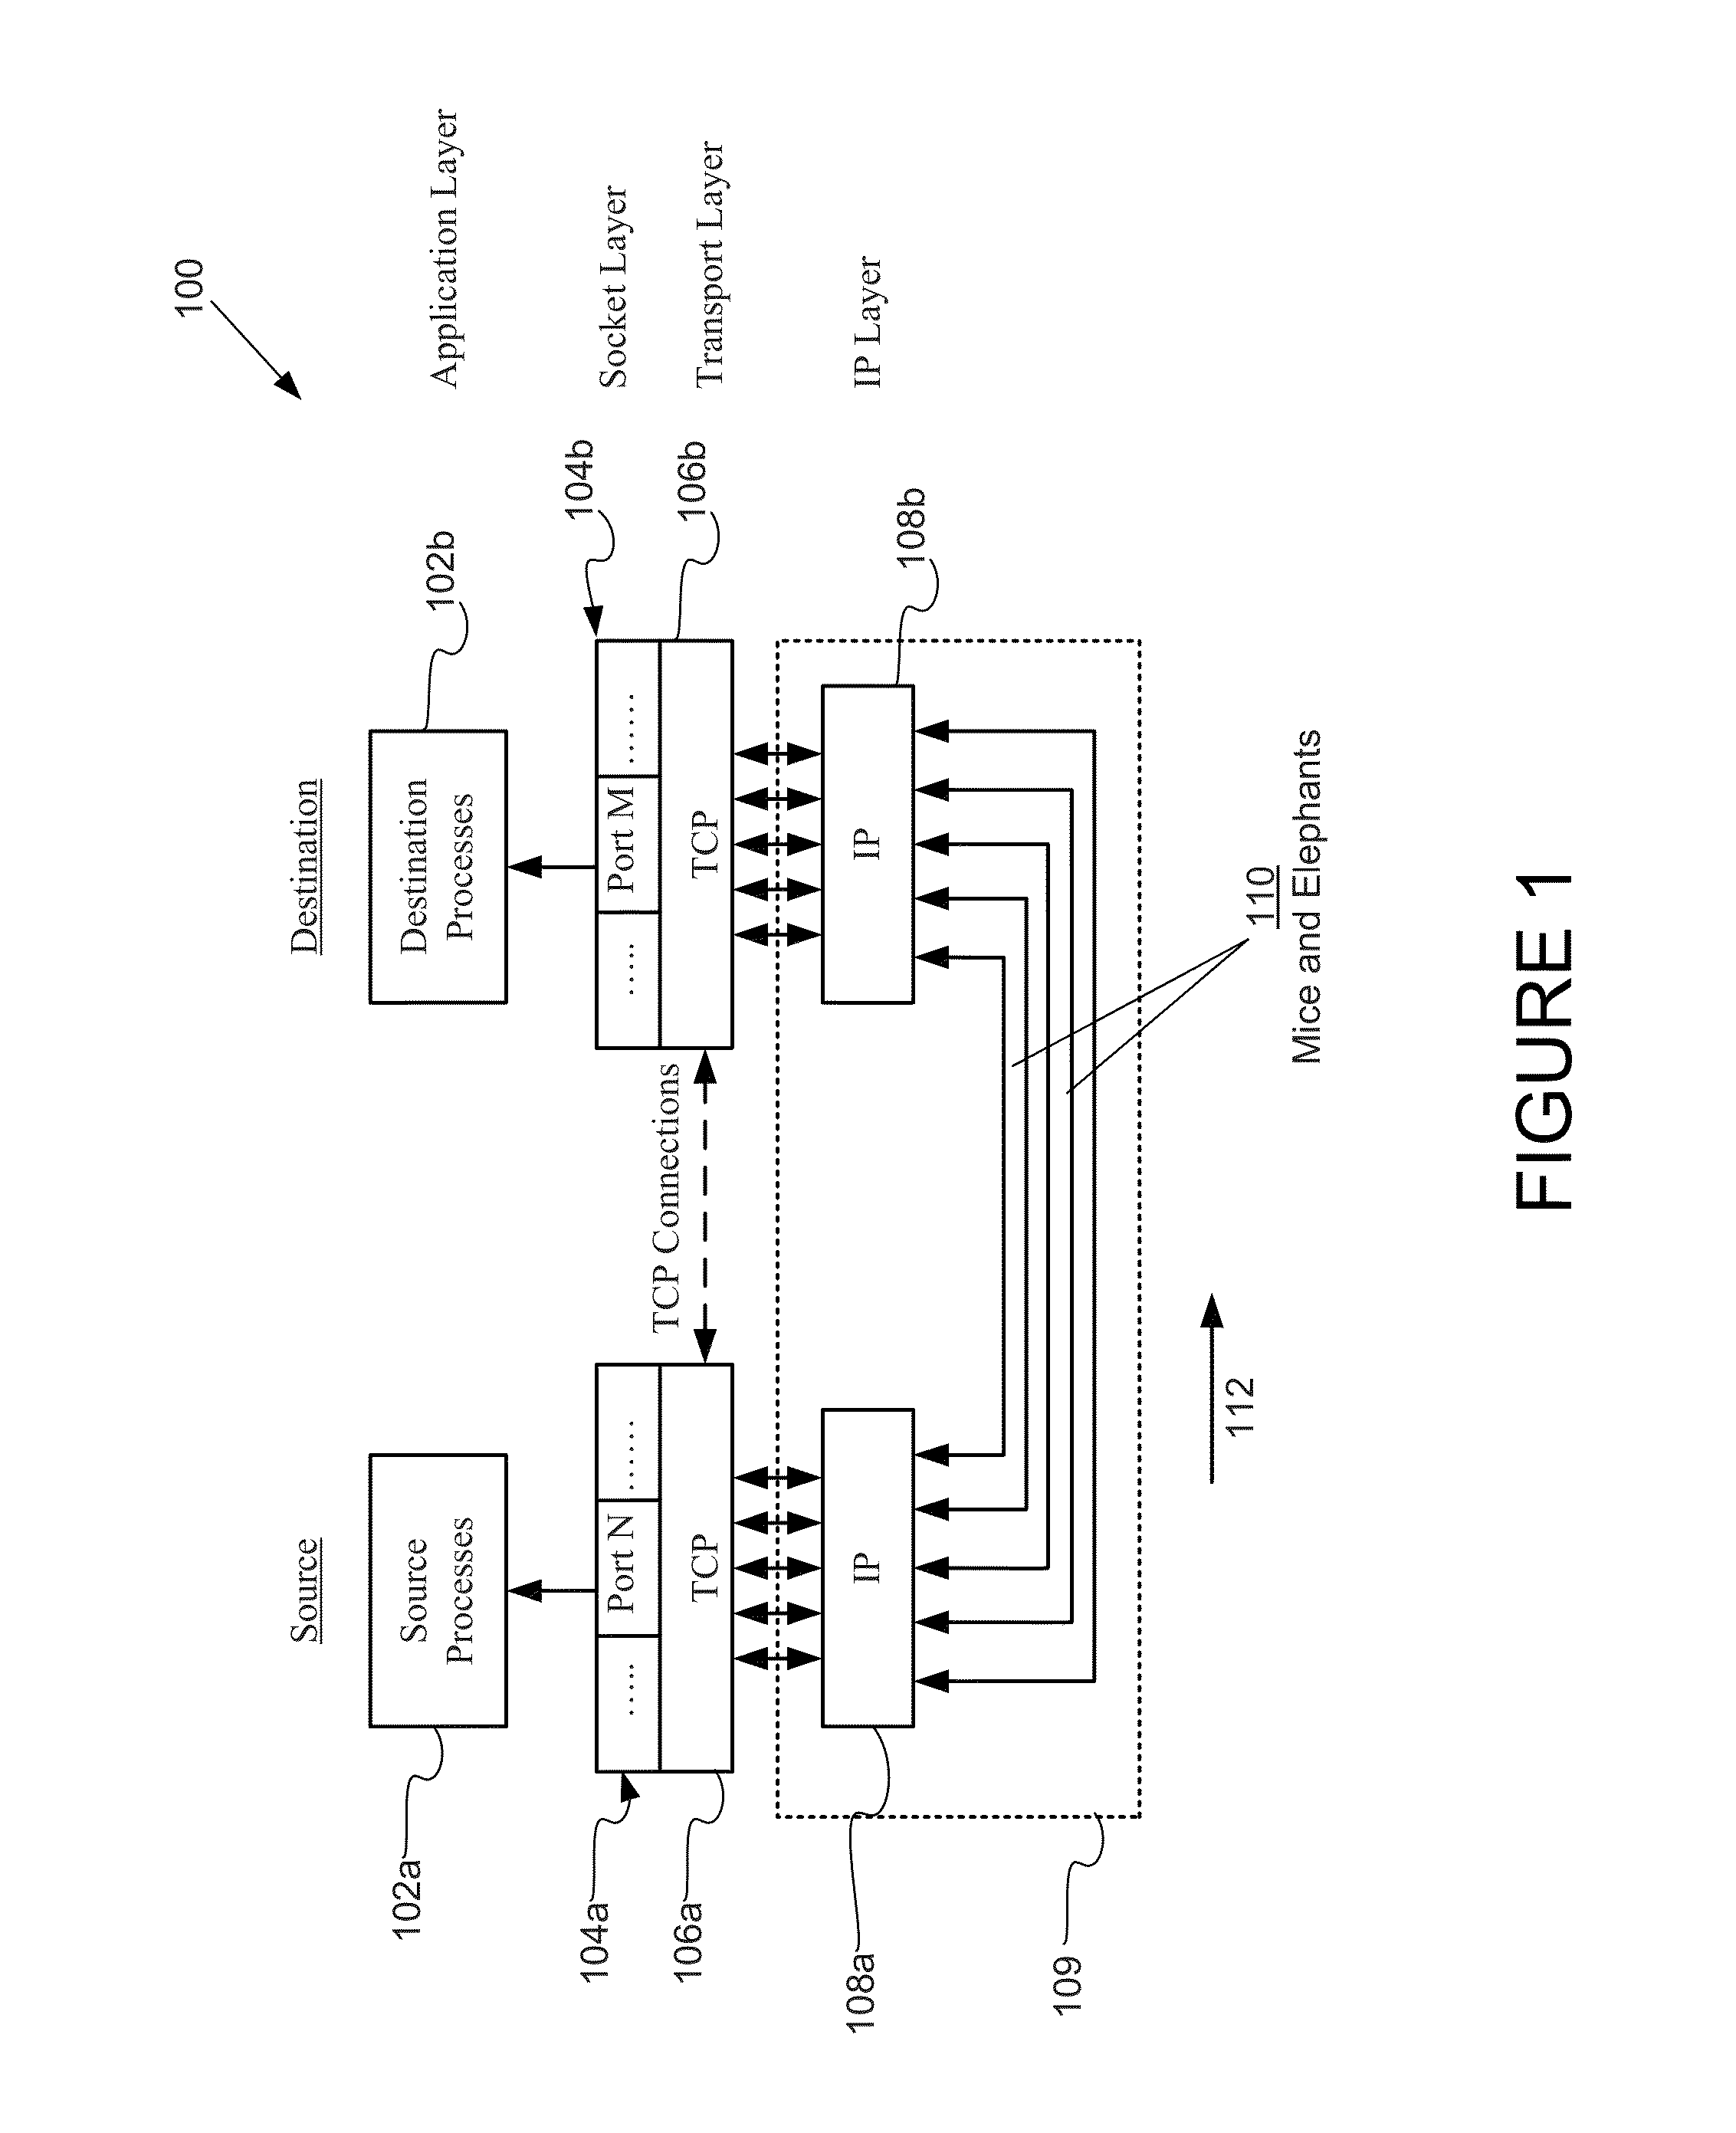 Methods and systems for detecting, locating and remediating a congested resource or flow in a virtual infrastructure